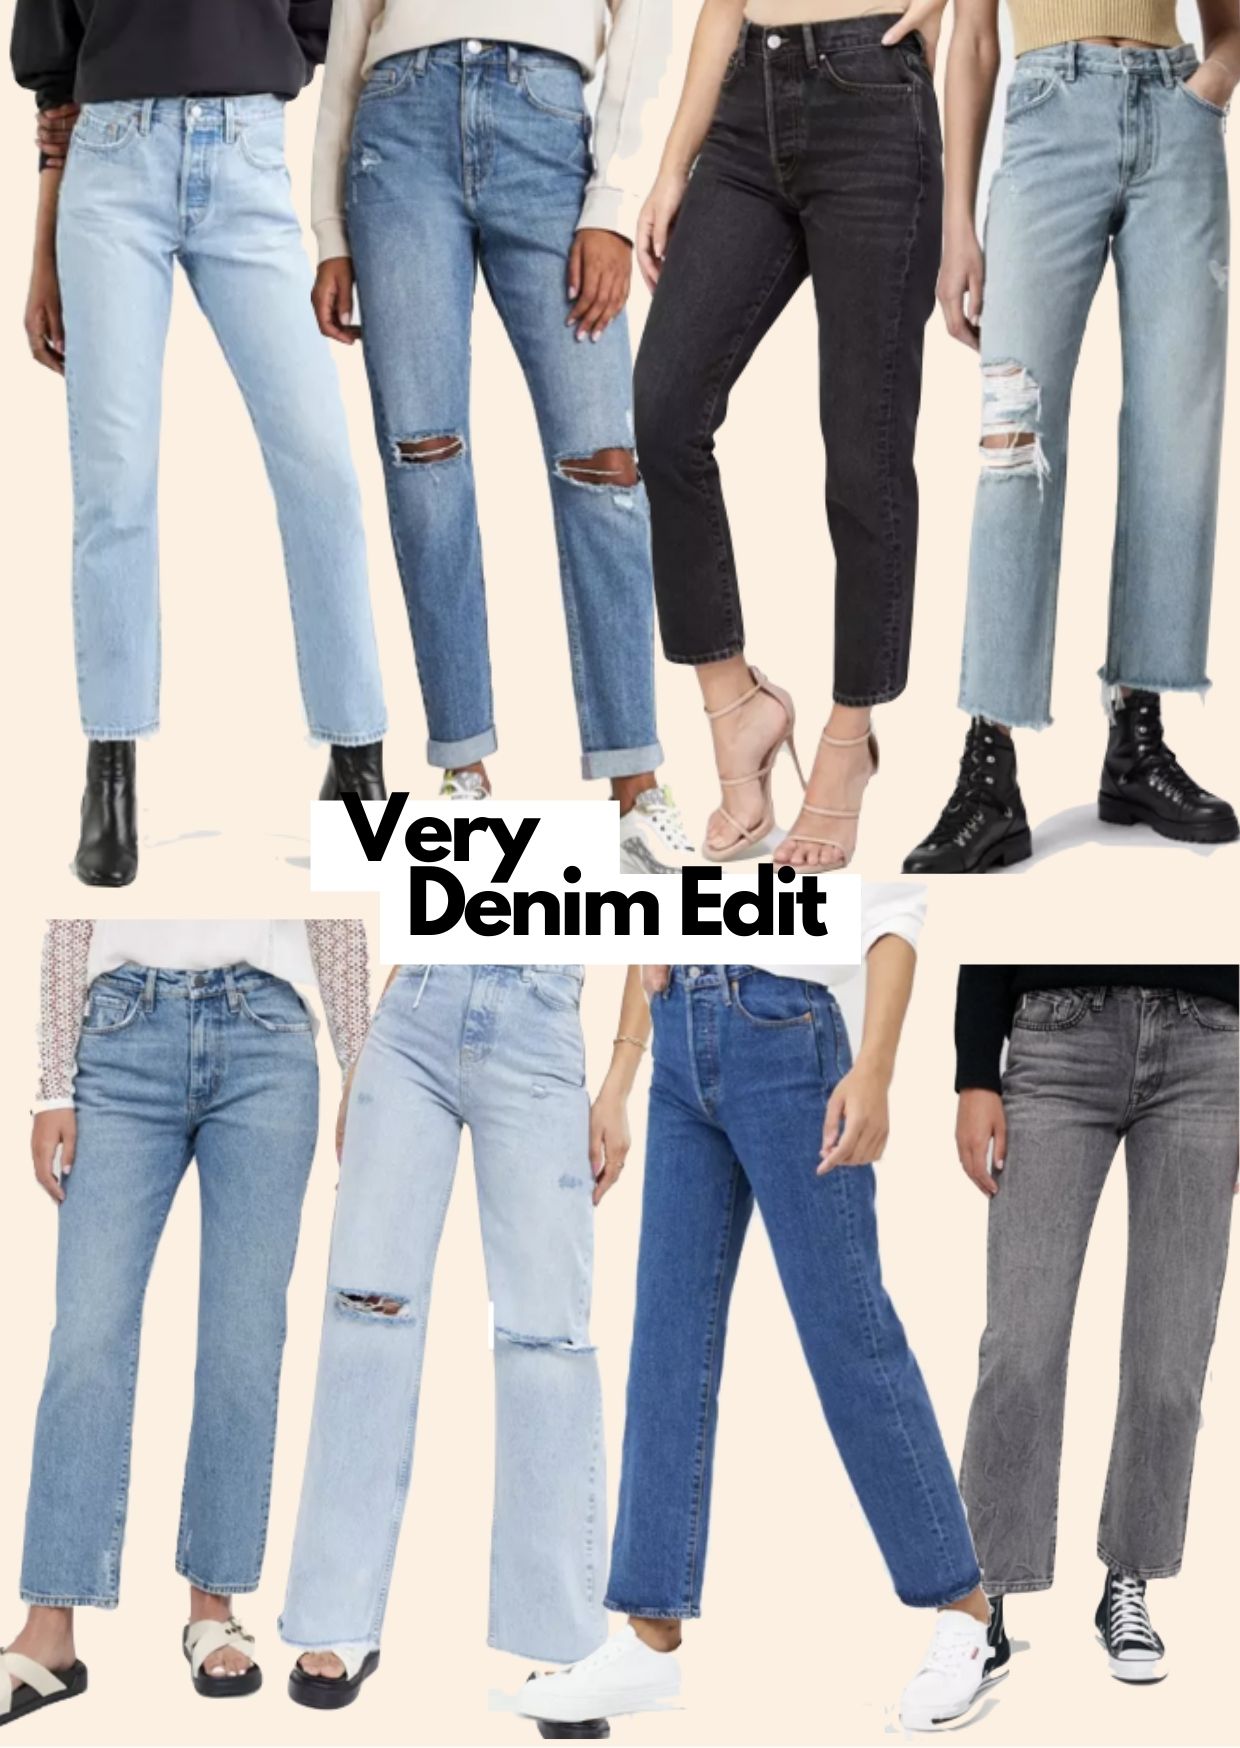 Very Denim edit - Styling Jeans for Autumn